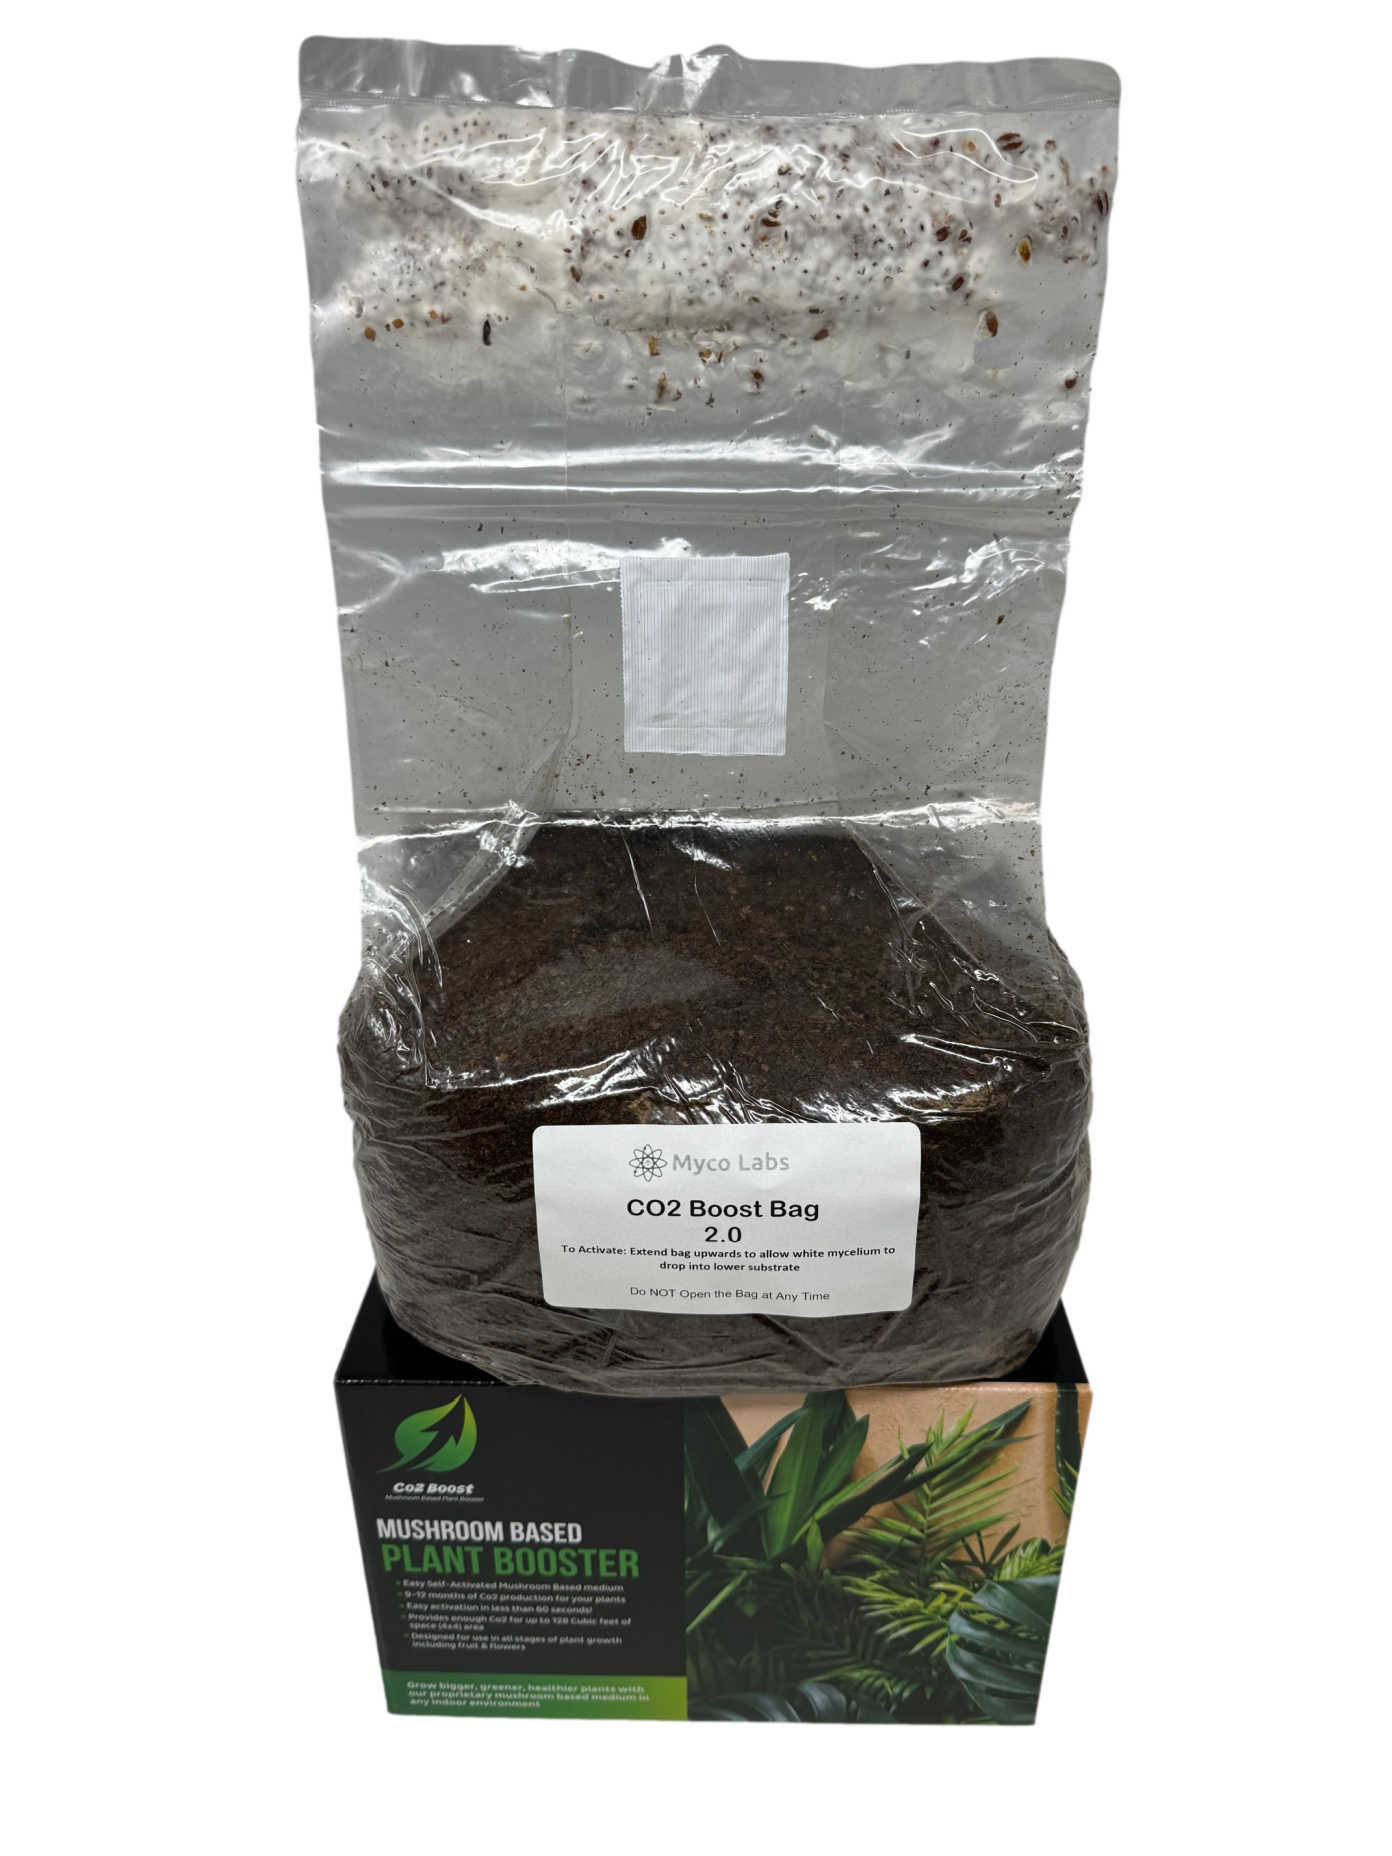 Myco Labs - Co2 Boost Self-Activated Bag for Plants, Grow Rooms 2.0 #CO21